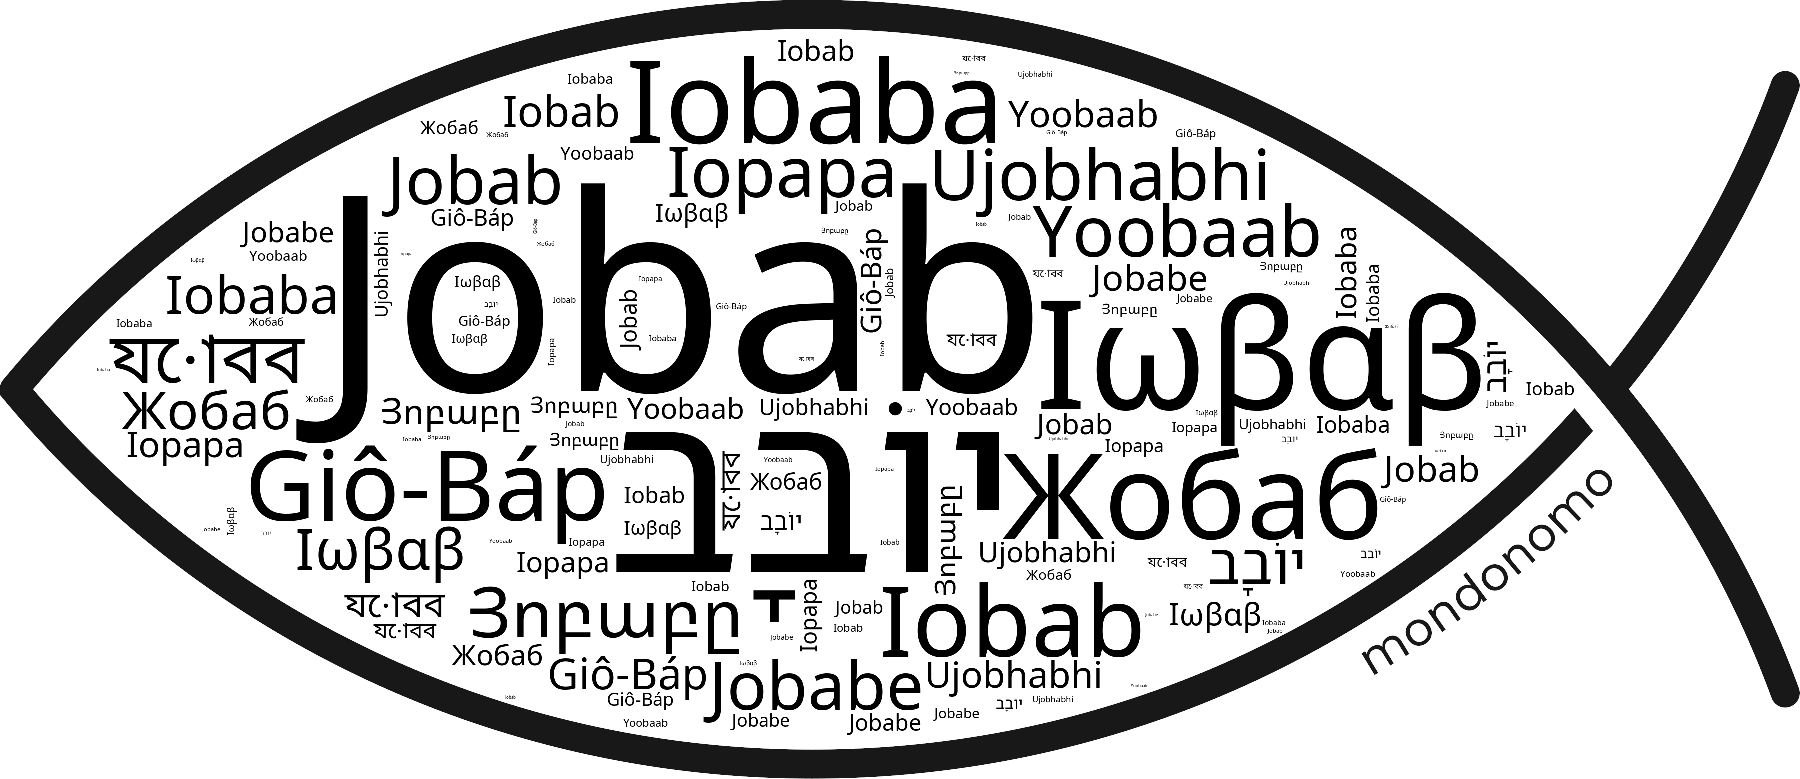 Name Jobab in the world's Bibles